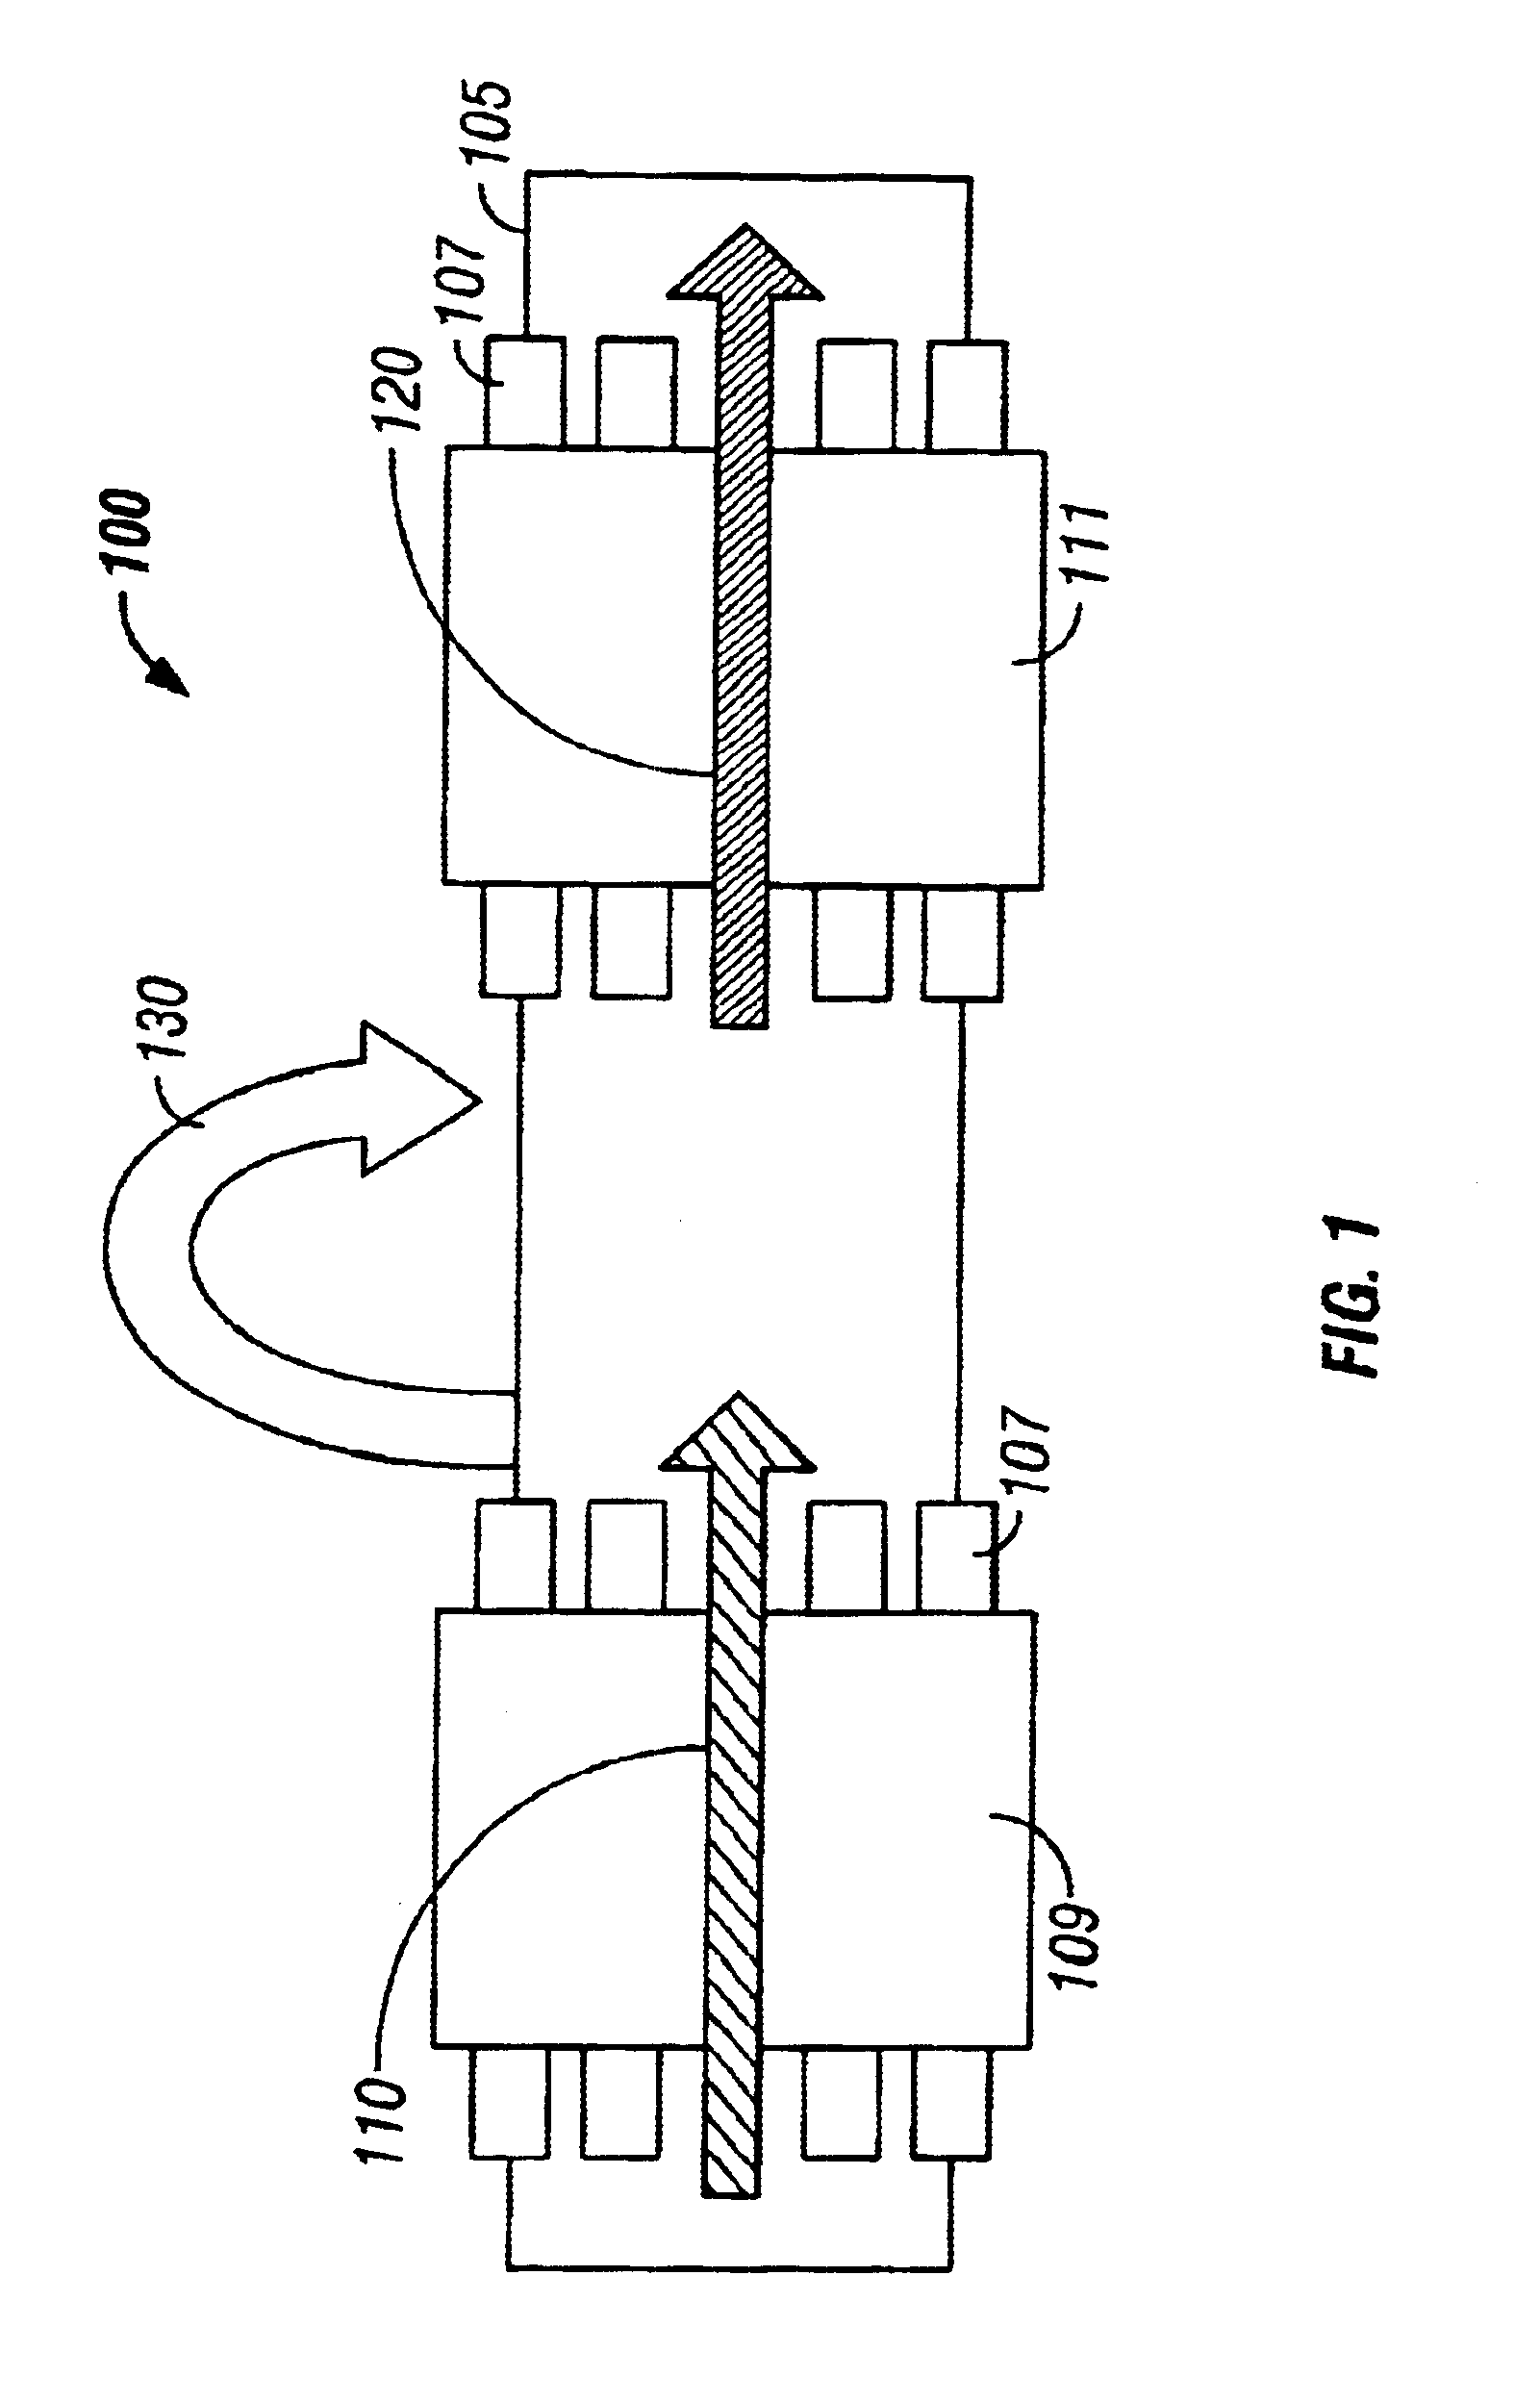 Multi-component induction instrument